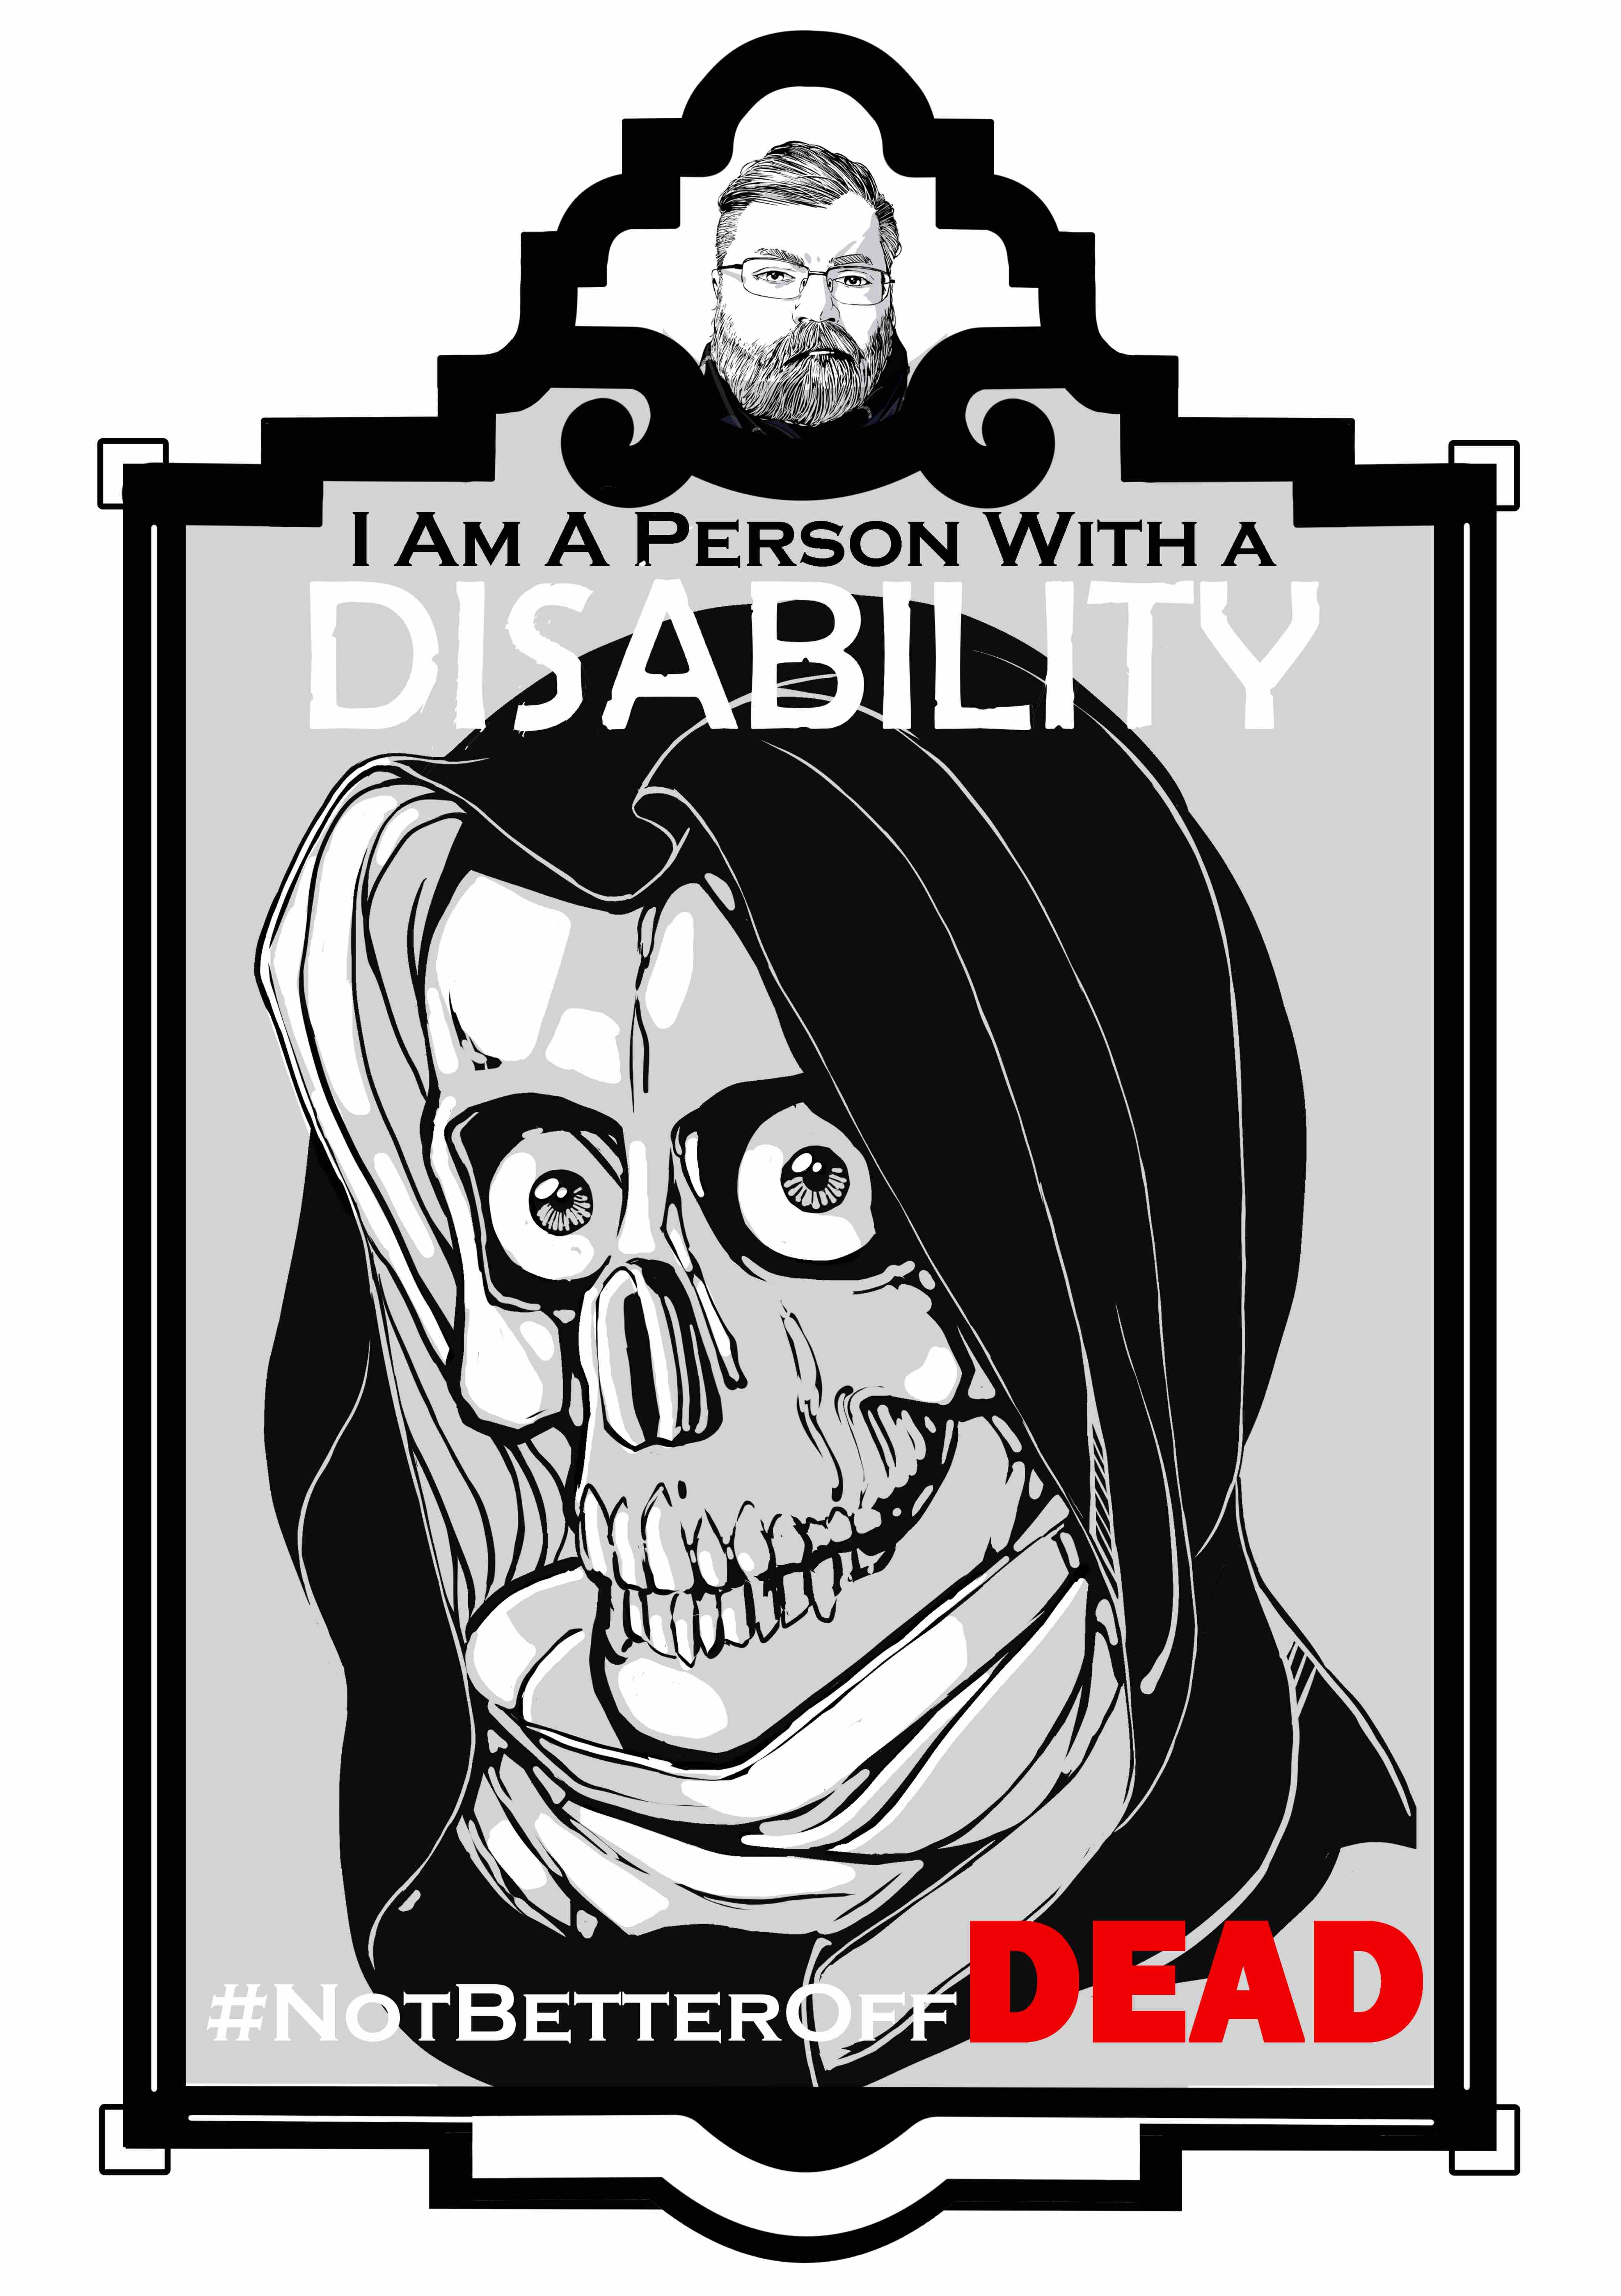 An illustration of the Grim Reaper from the neck up in an art deco frame. The frame consists of a small marquee at the top with an image of the artist and the main image below. The text “I am a person with a disability.’ Sits at the top of the illustration. The word “Disability” is in all caps and is colored White. The text “# Not Better Off Dead” is at the bottom of the illustration with the text “Dead” in all caps and colored red. The reaper is framed in gray wearing a hood. It stares ahead just a skull with no flesh on its bones. The hood is black on the outside and white inside. Light reflects on the skull and white cloth. Its eyes are large and round with pupils at the center.